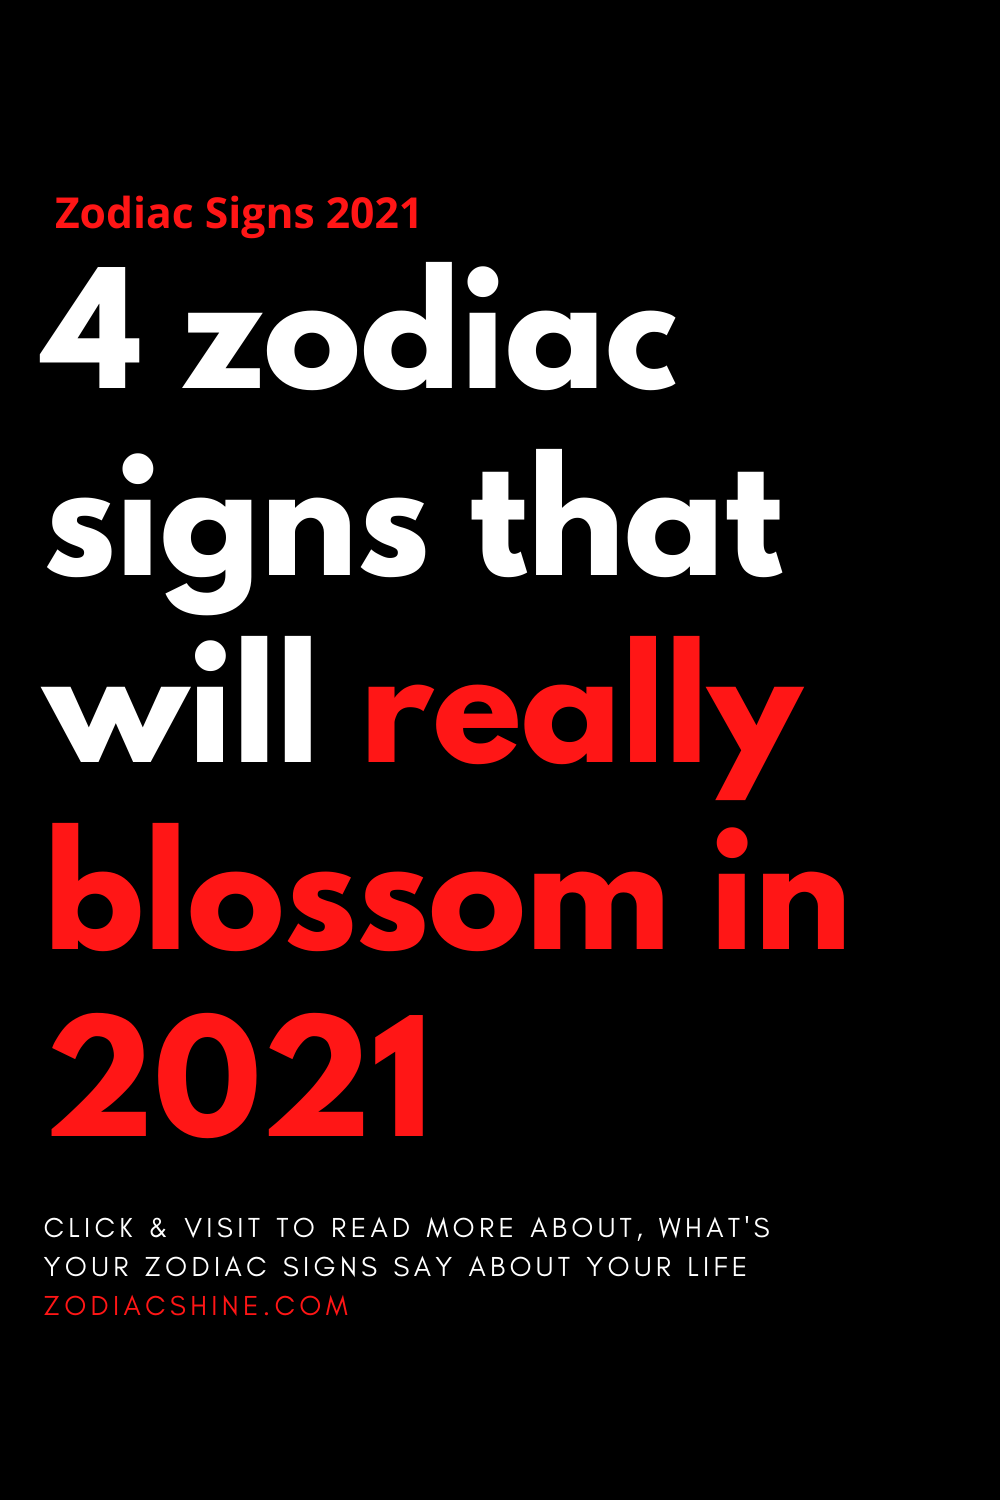 4 zodiac signs that will really blossom in 2021